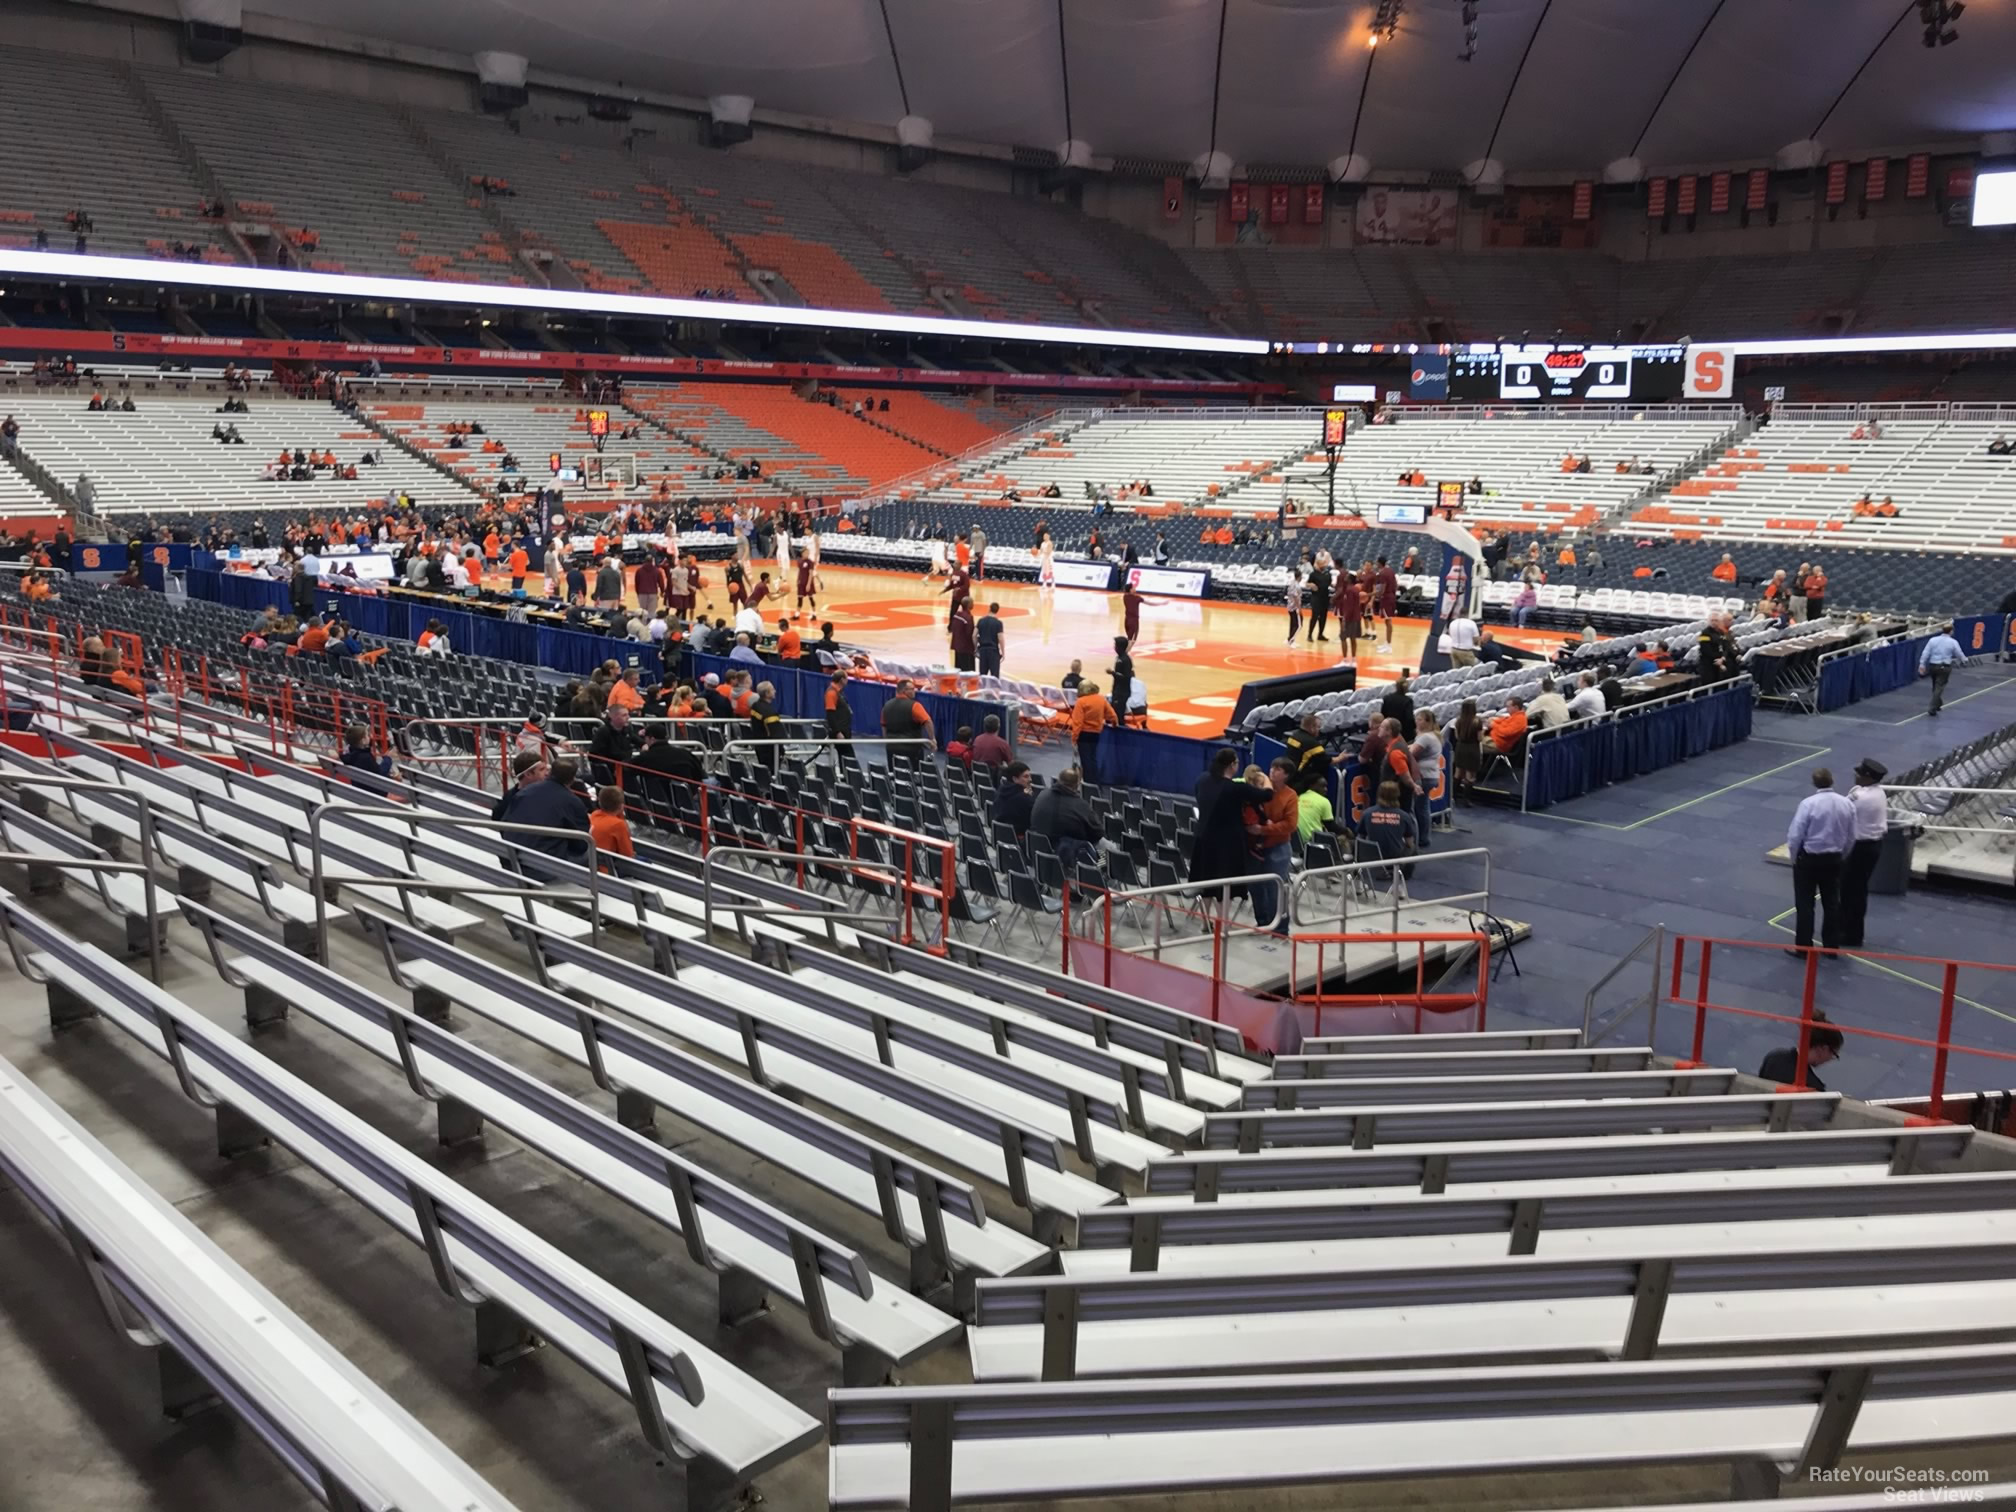 https://www.rateyourseats.com/shared/Carrier-Dome-Basketball-Section-106-Row-M-on-11-18-2017f.jpg